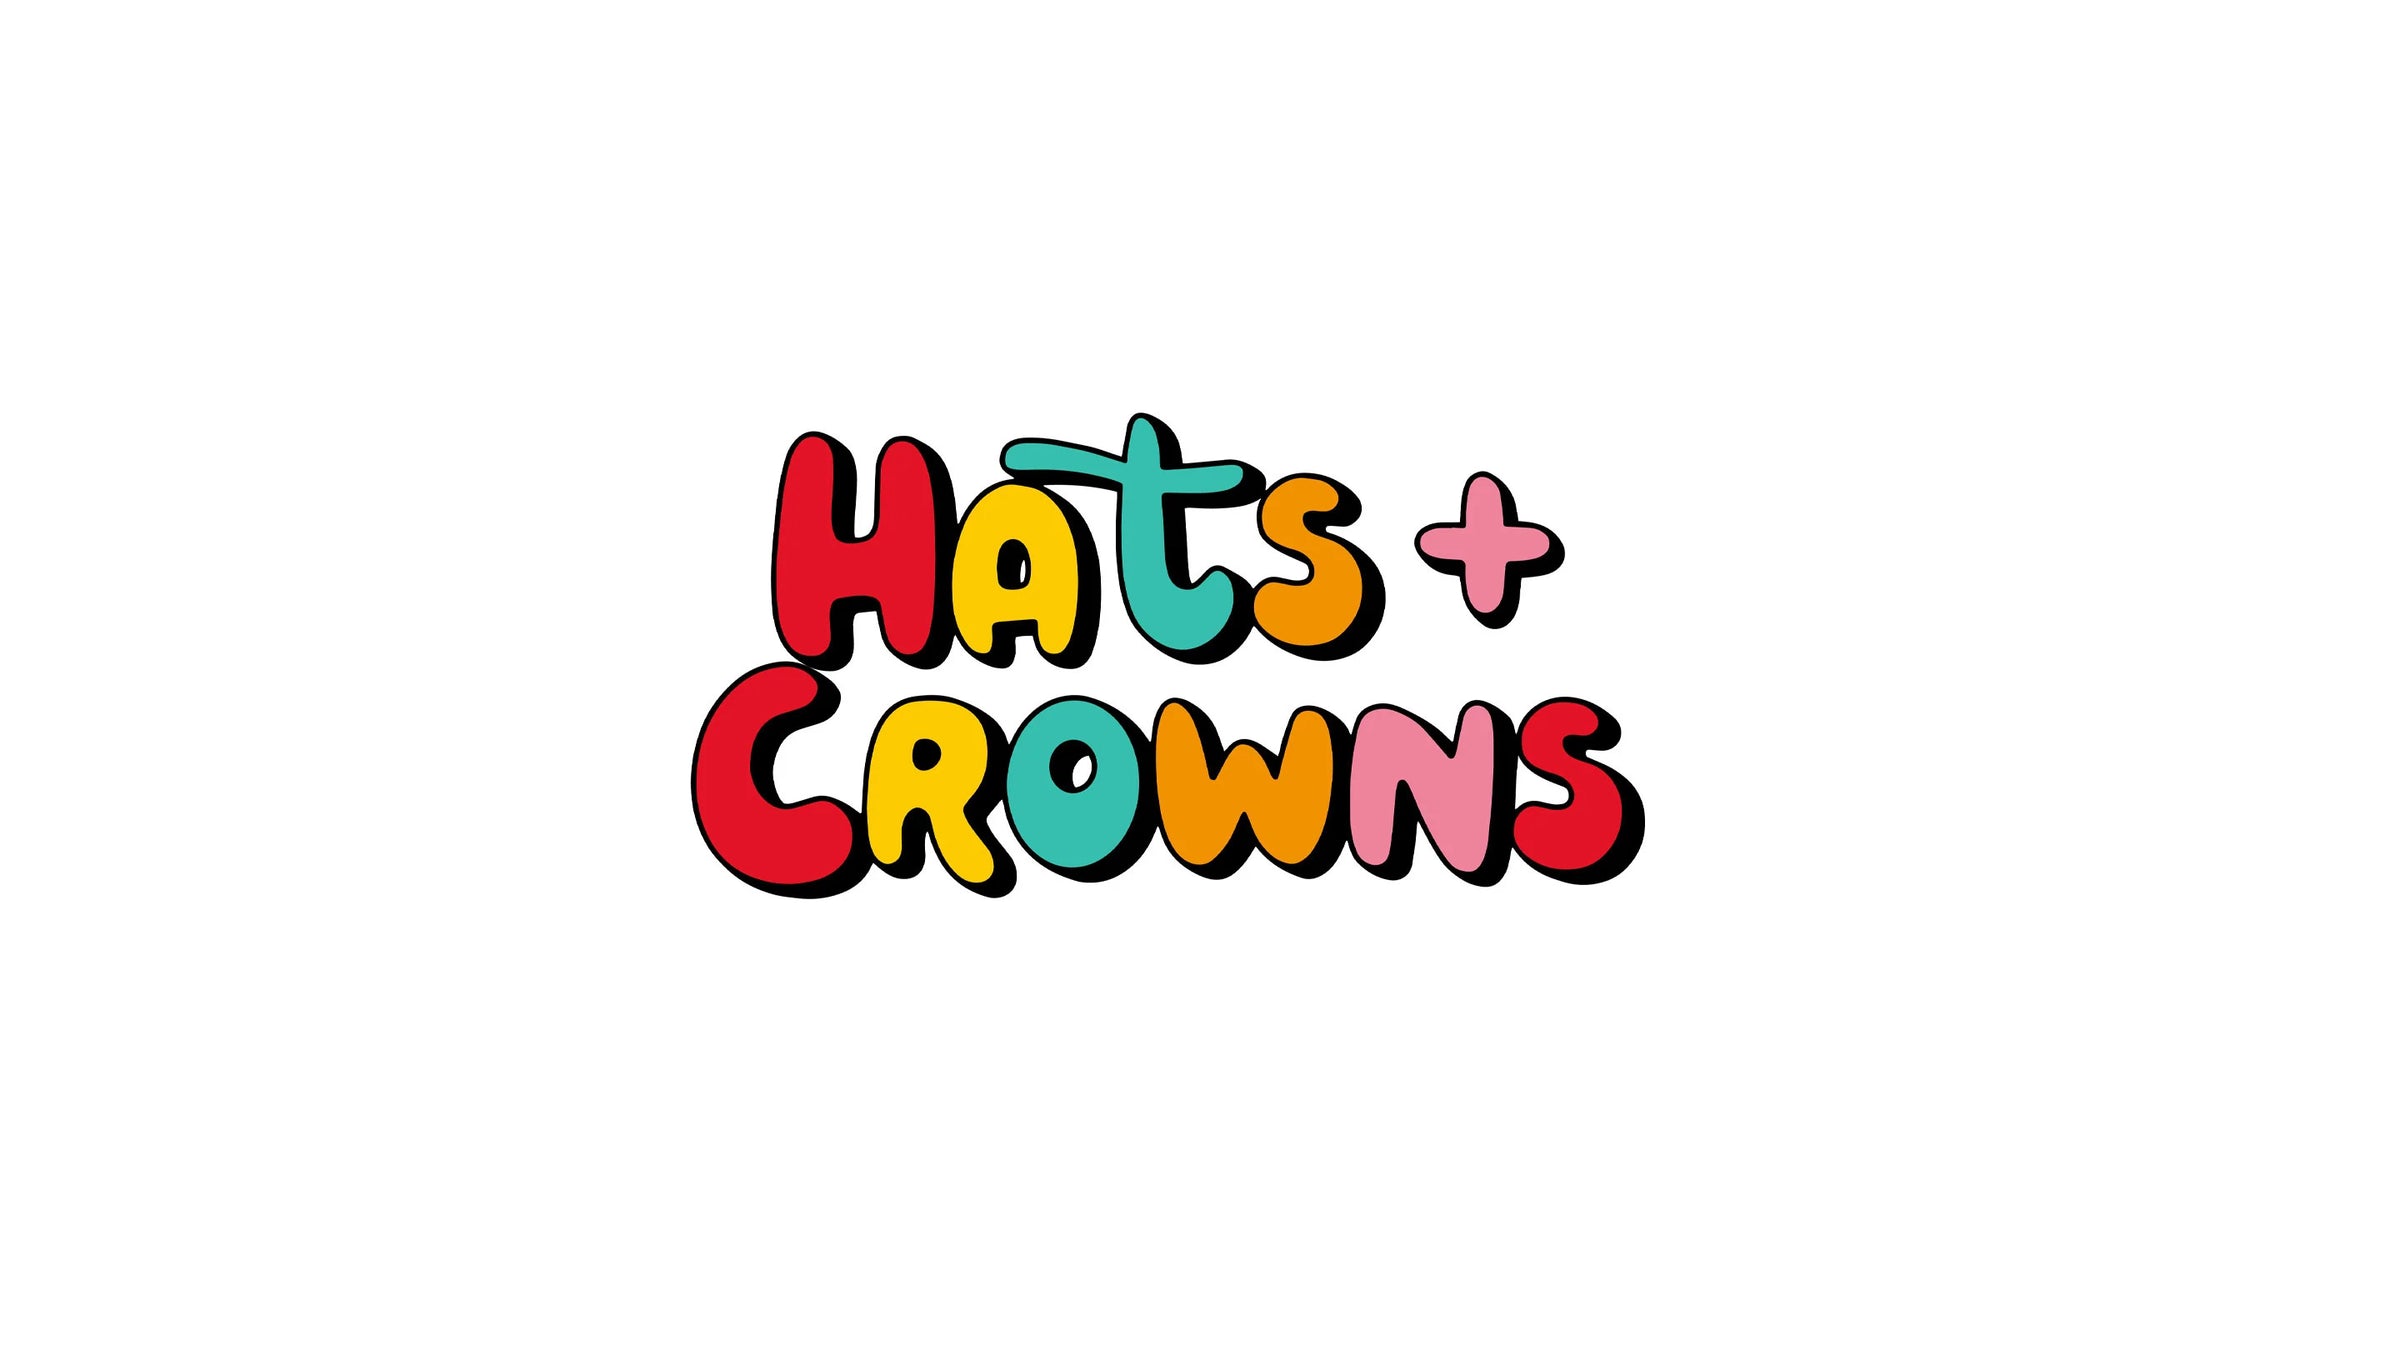 Hats & Crowns